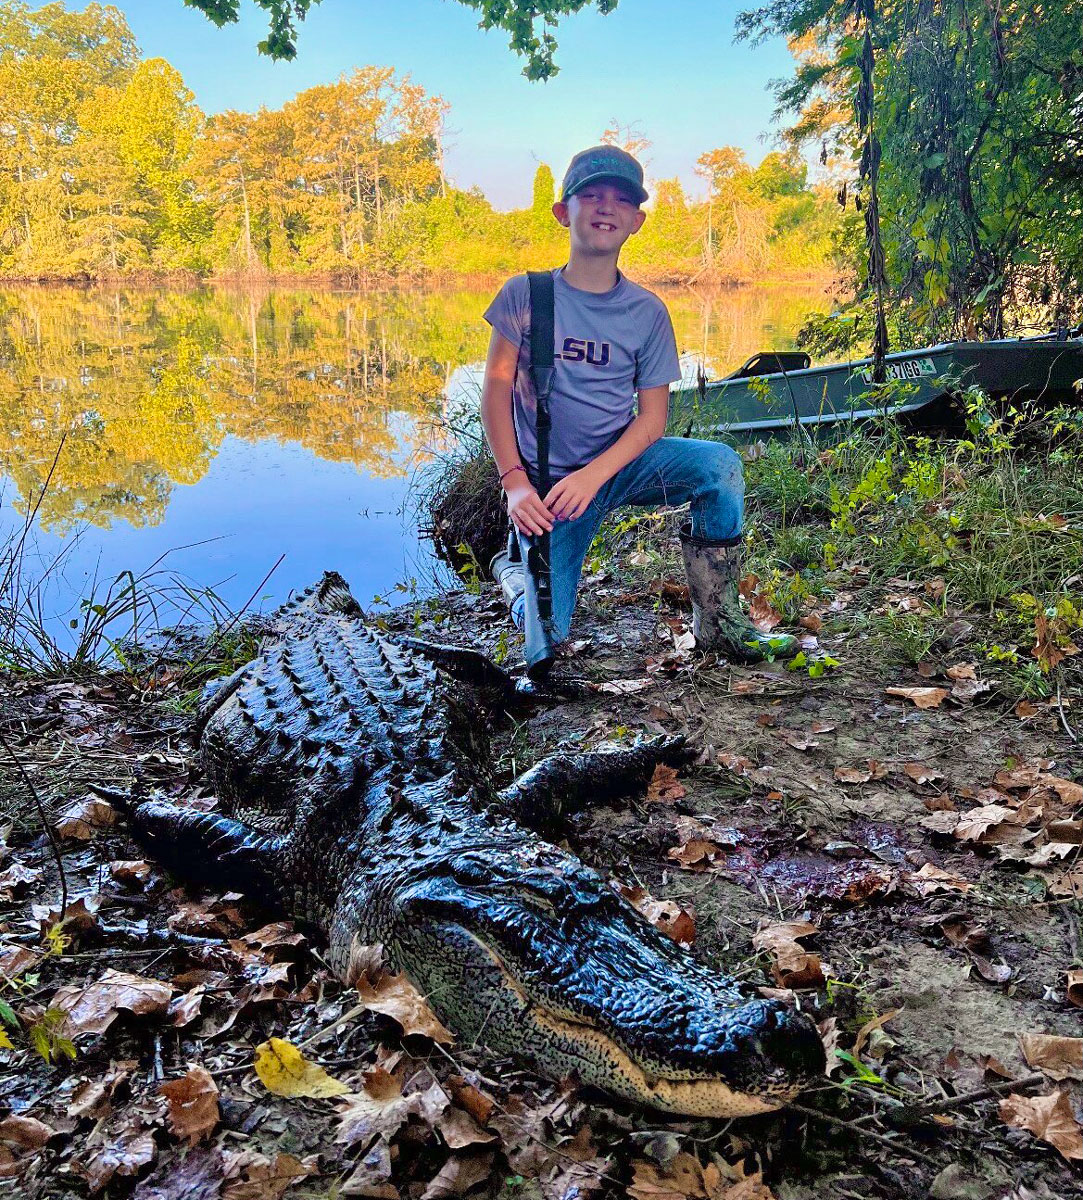 Nine-year-old Caleb Hardwick killed this 9-foot, 9-inch gator hunting with his dad, Mead, and grandma, Mary, on Somerset Plantation in Tensas Parish guided by Dr. Buba Bonneval.